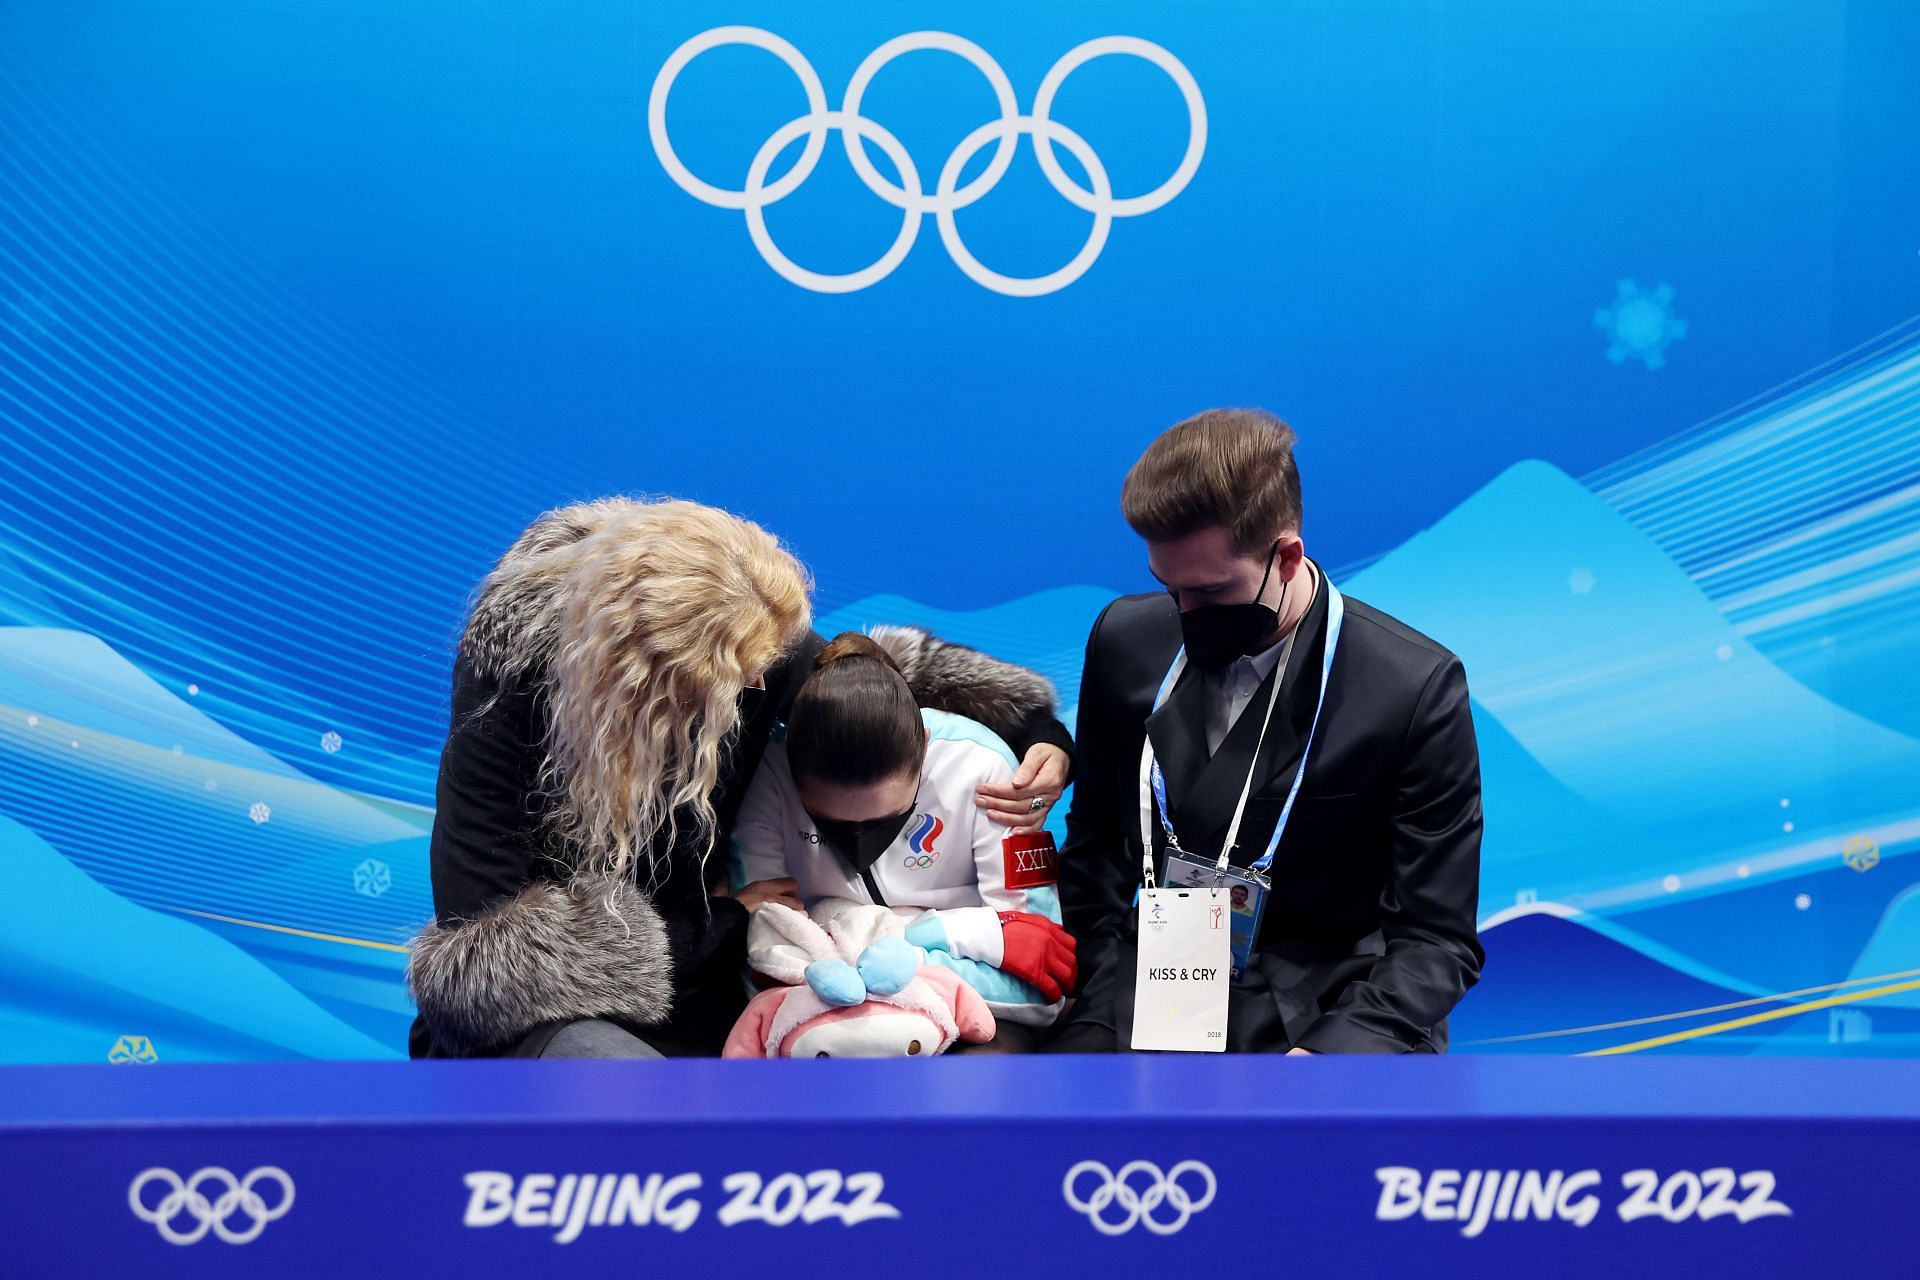 Kamila Valieva devasted after 4th place finish at 2022 Winter Olympics